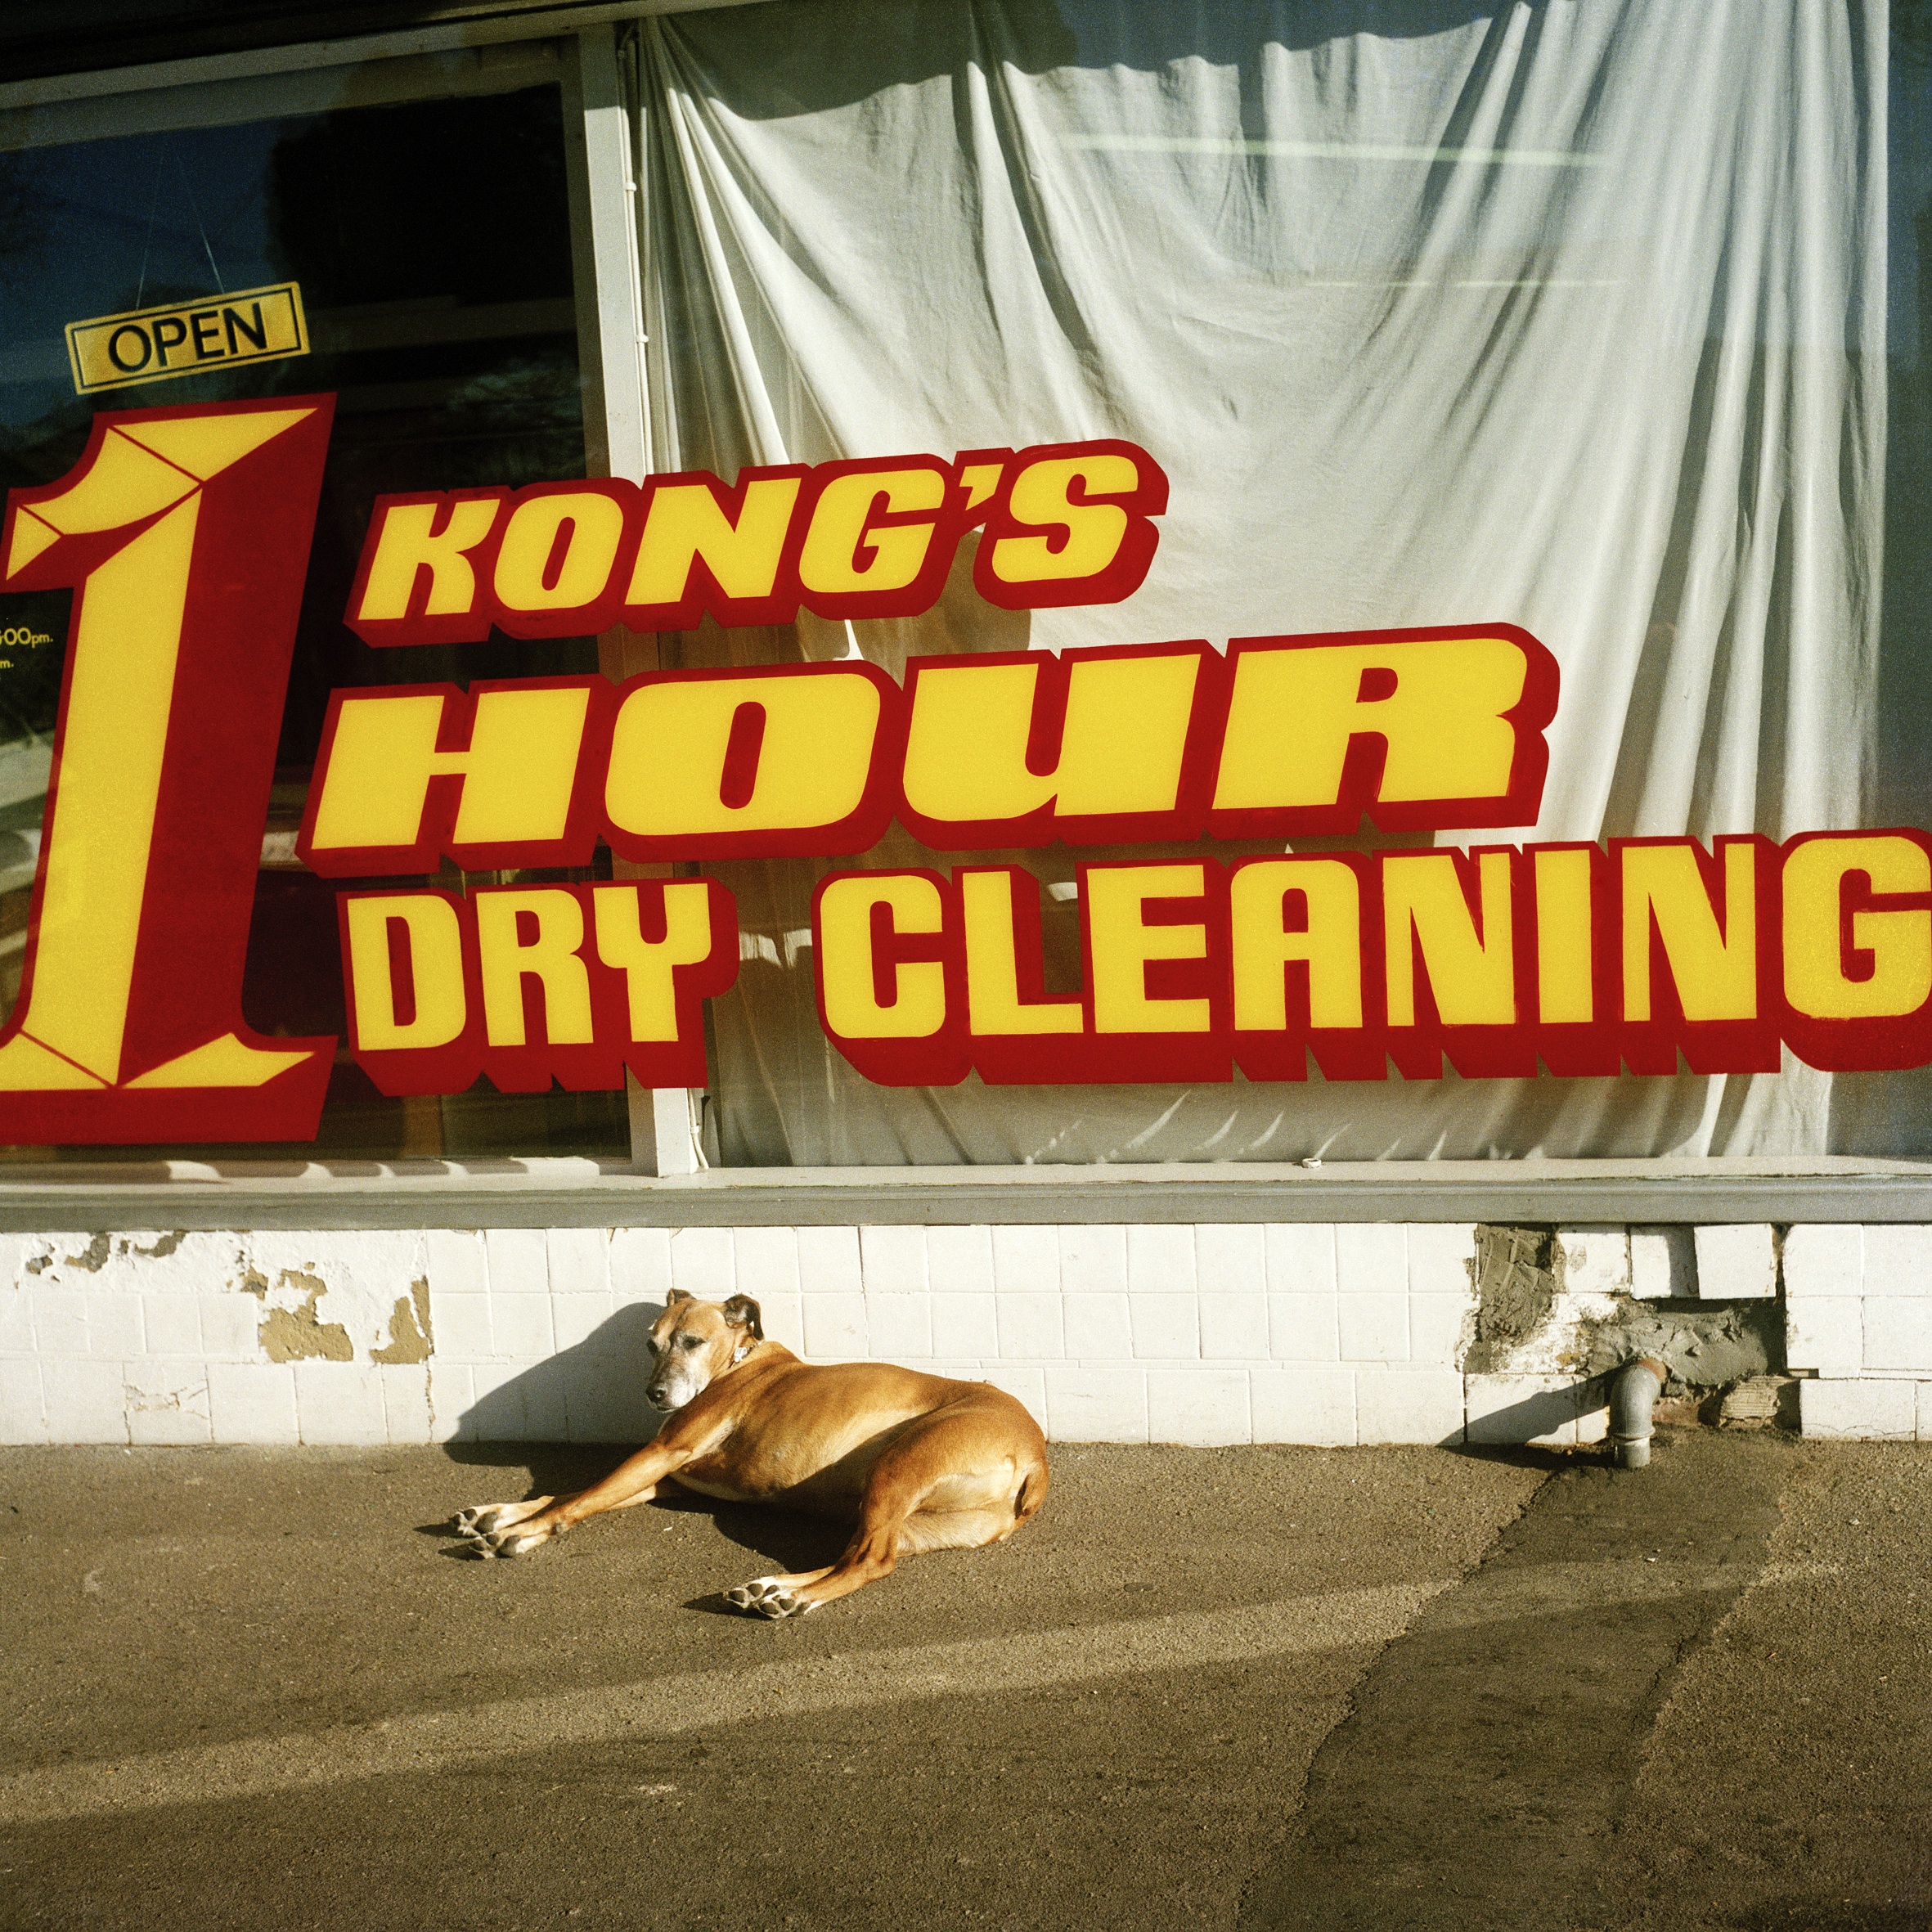 Kongs' One Hour Dry Cleaning (1998)